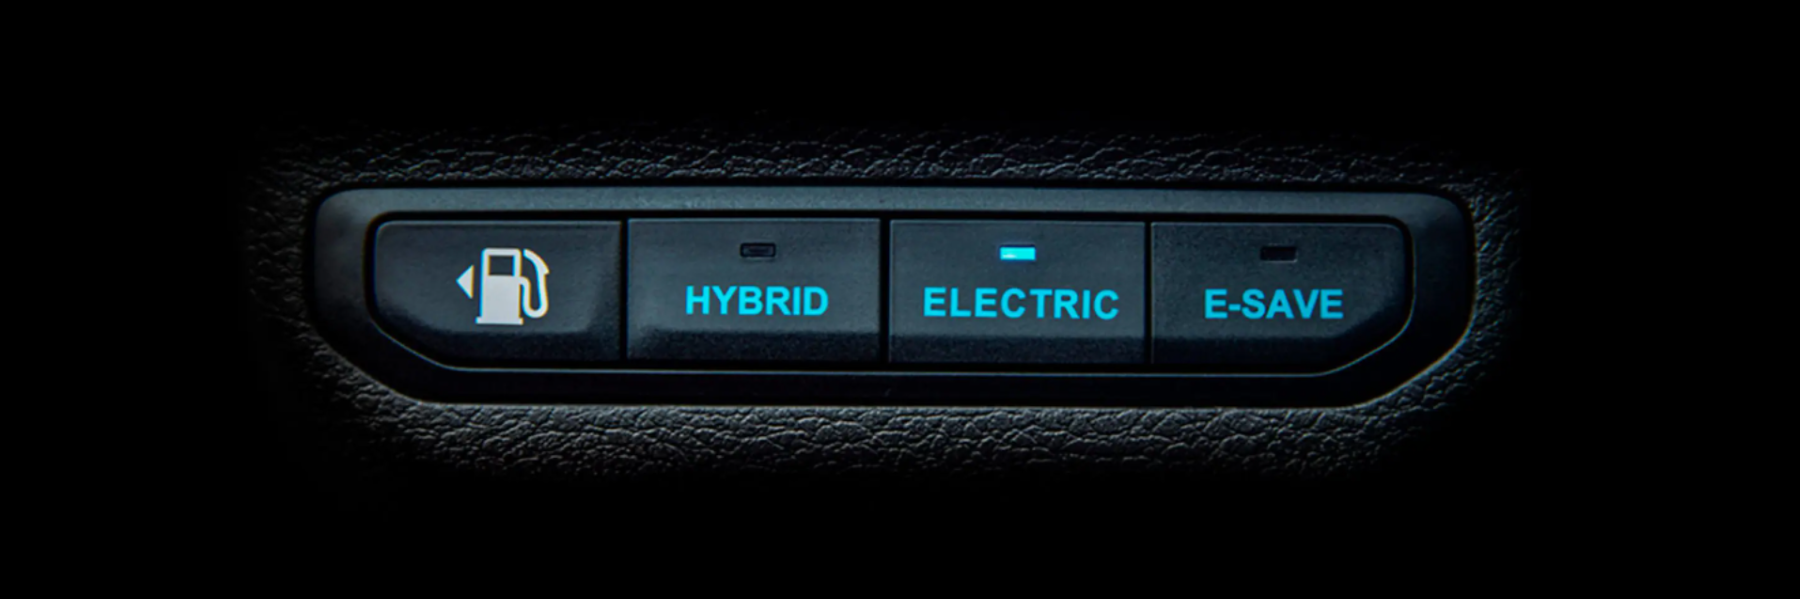 The Jeep Wrangler 4xe drive modes, including an all-electric mode that will lead to the Jeep Magneto